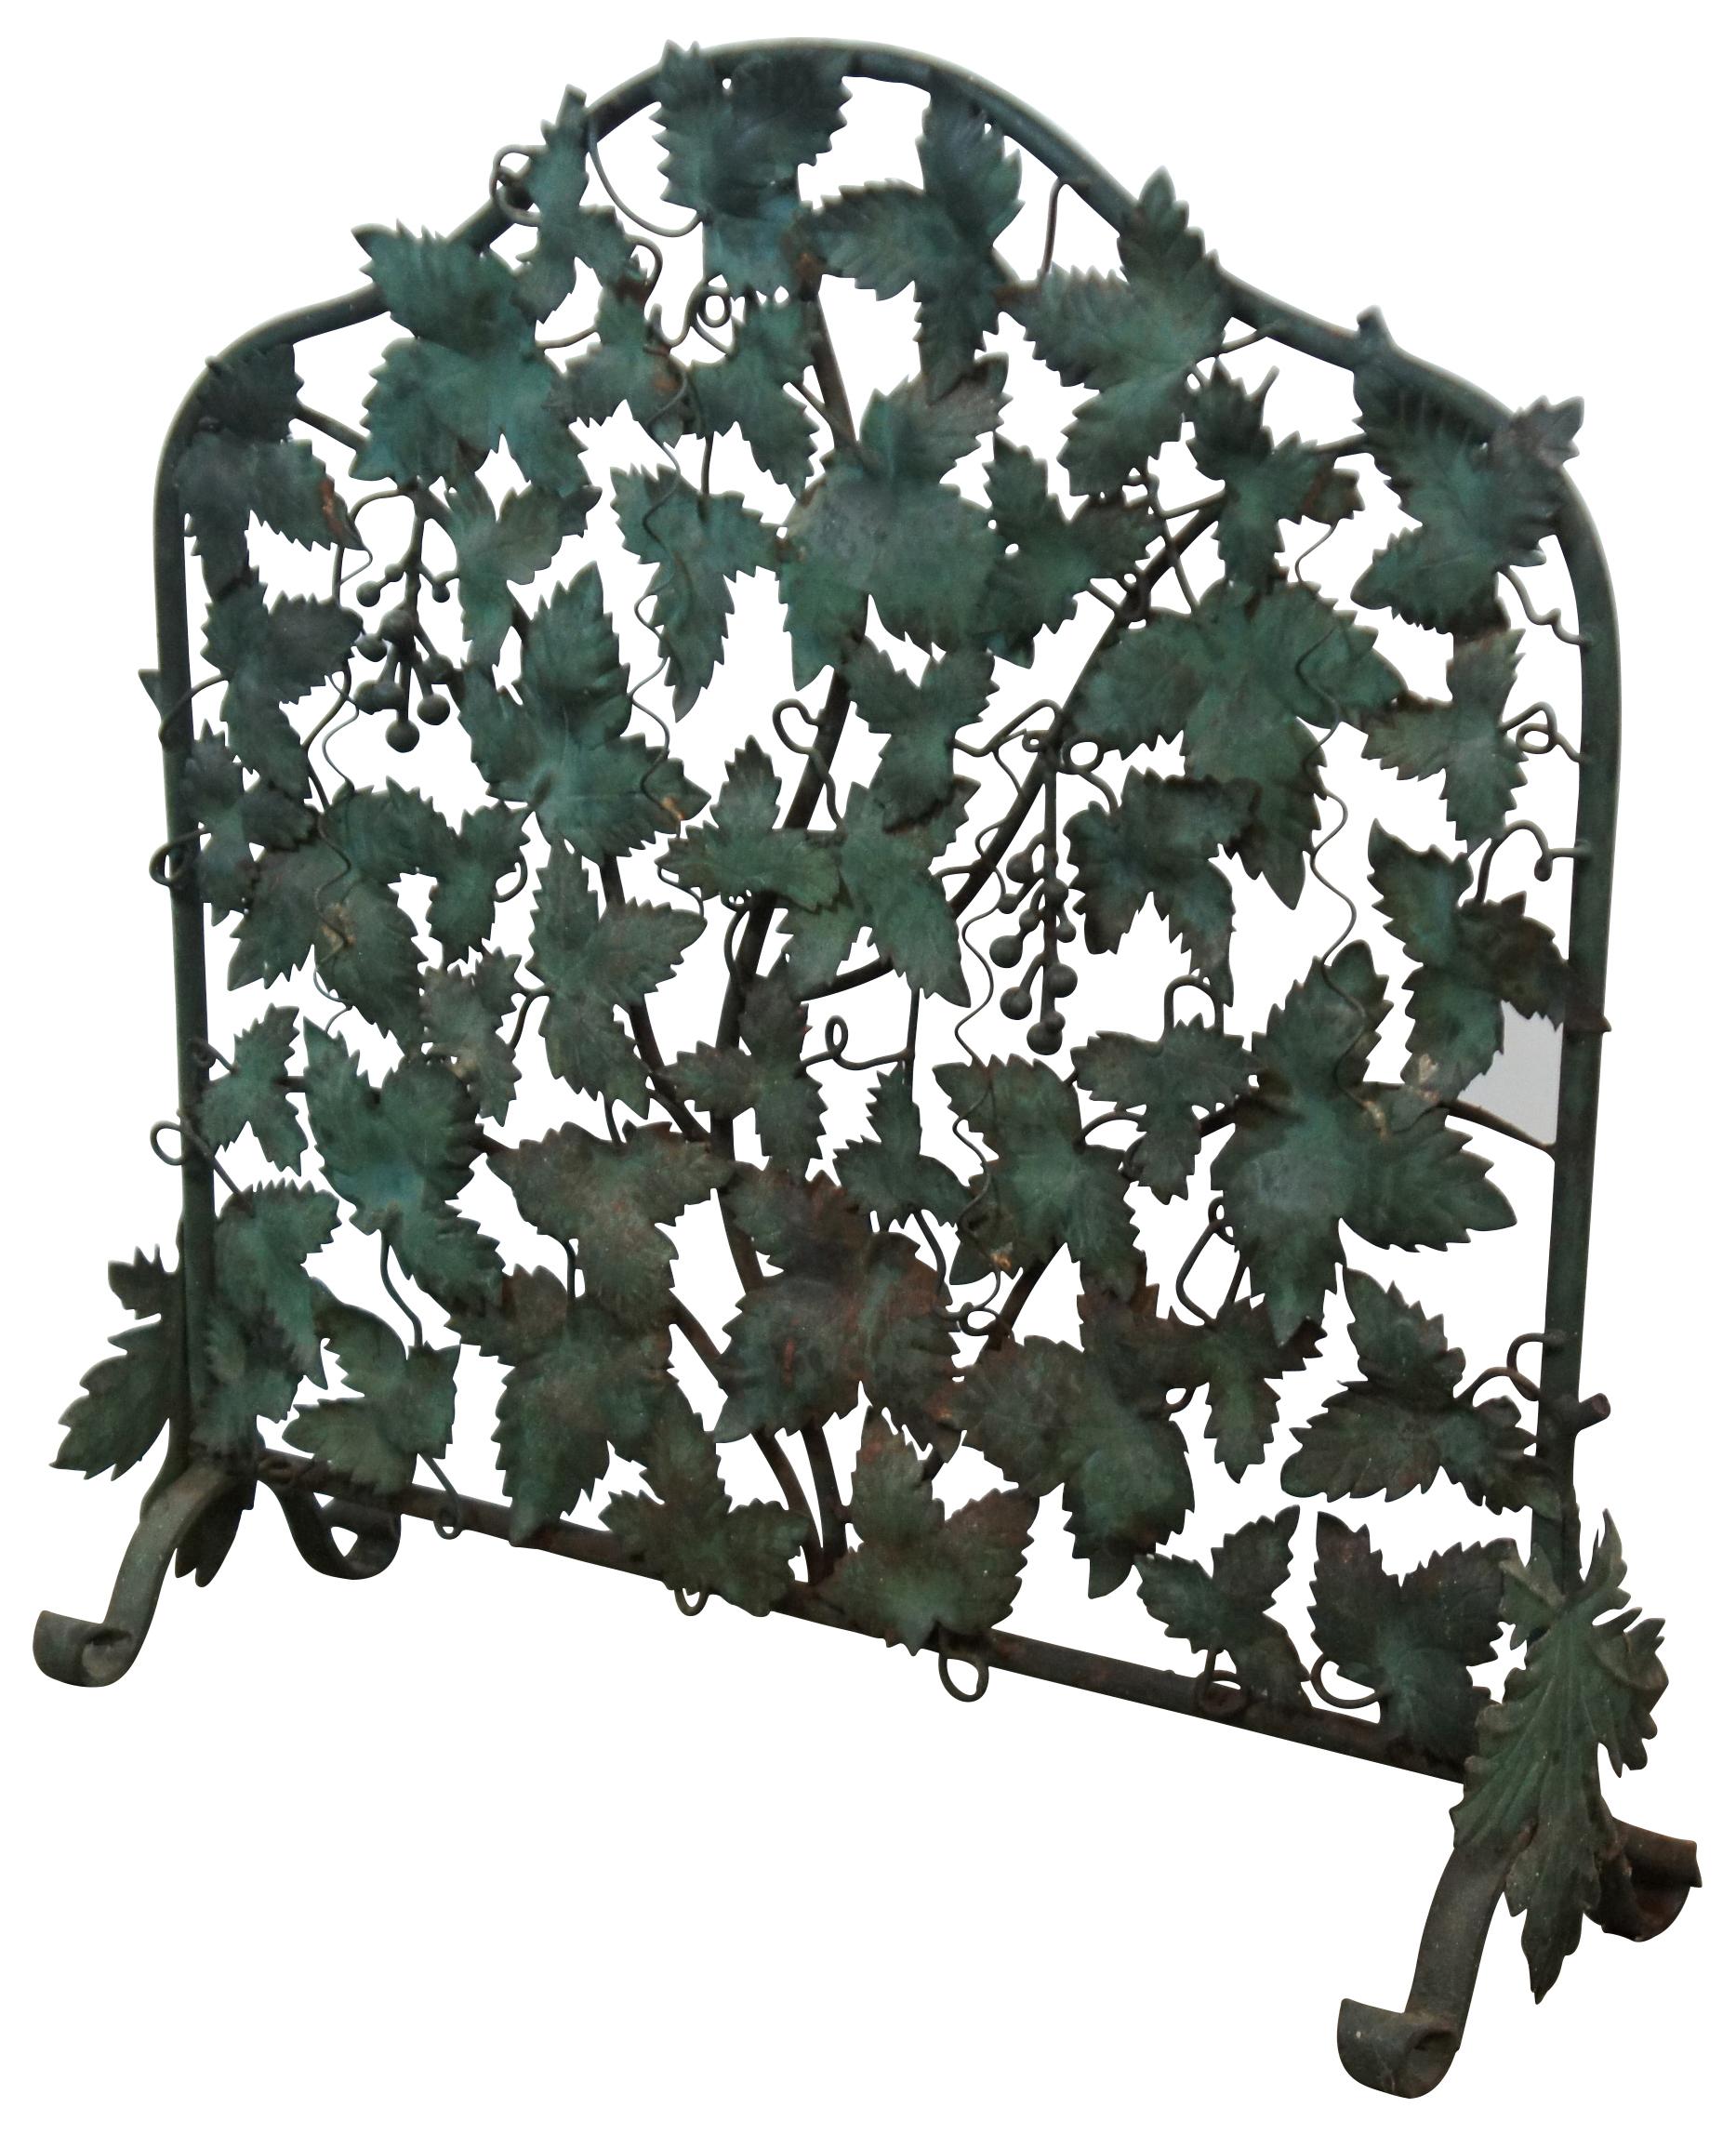 An exquisite Mid-Century Modern Italian wrought iron single panel fireplace screen shaped like a wall of grape vines / leaves with small bunches of grapes, finished in green. Marked along back 